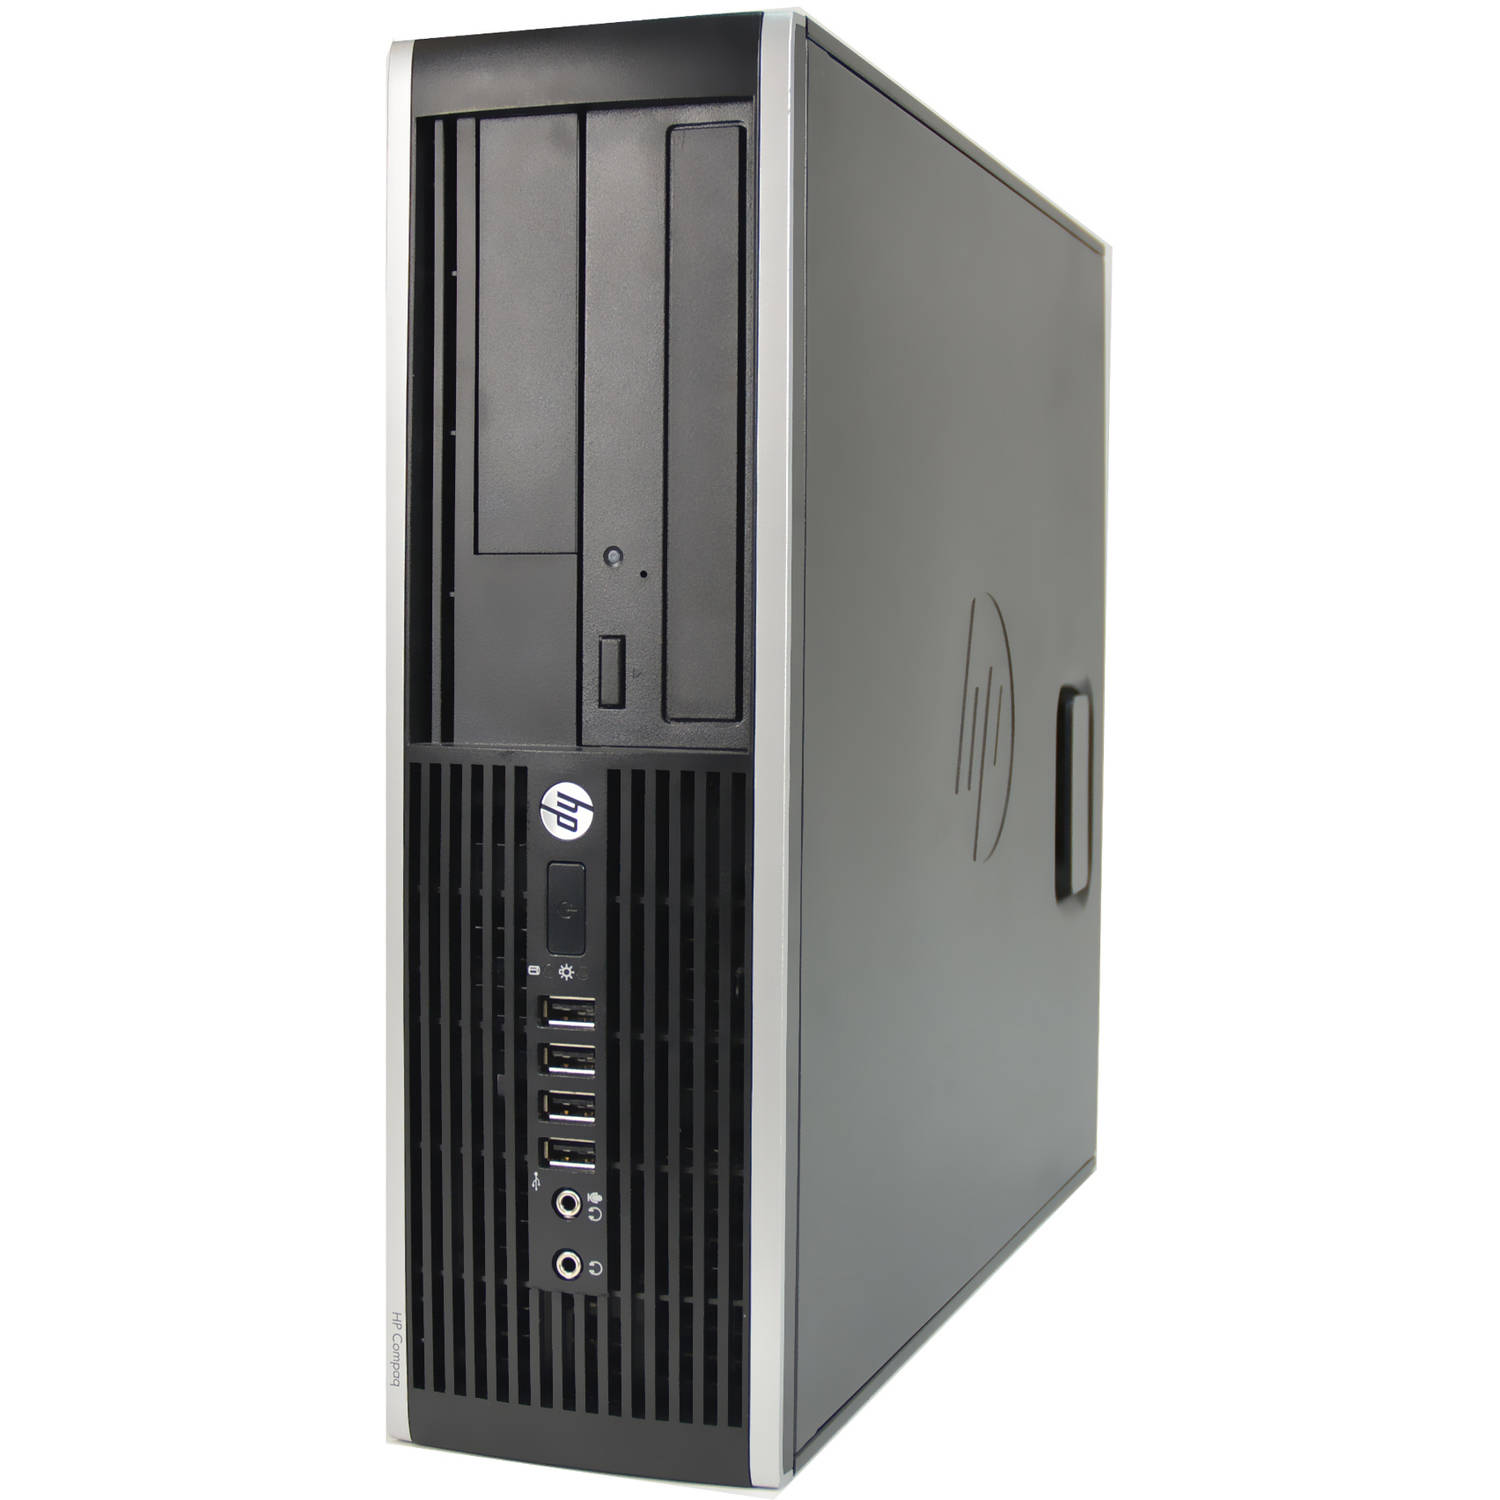 Used HP Compaq 8000 Small Form Factor Desktop PC with Intel Core 2 Duo Processor, 4GB Memory, 500GB Hard Drive and Windows 10 Pro (Monitor Not Included) - image 1 of 2